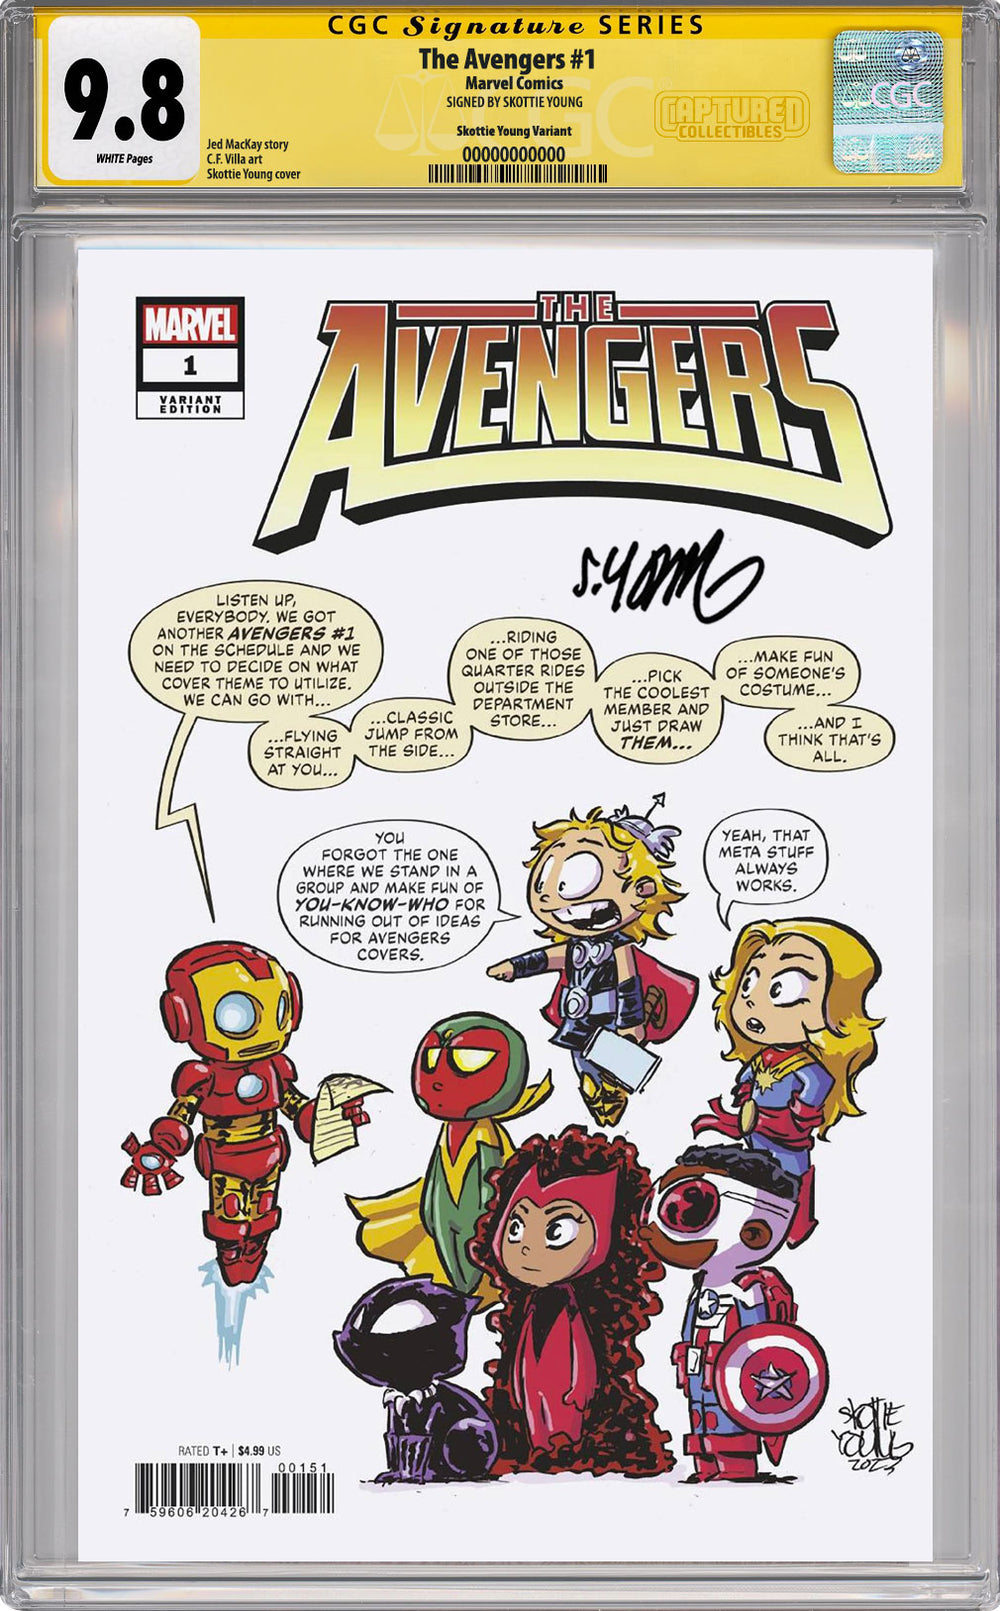 The Avengers #1 Variant CGC SS 9.8 Signed by Skottie Young